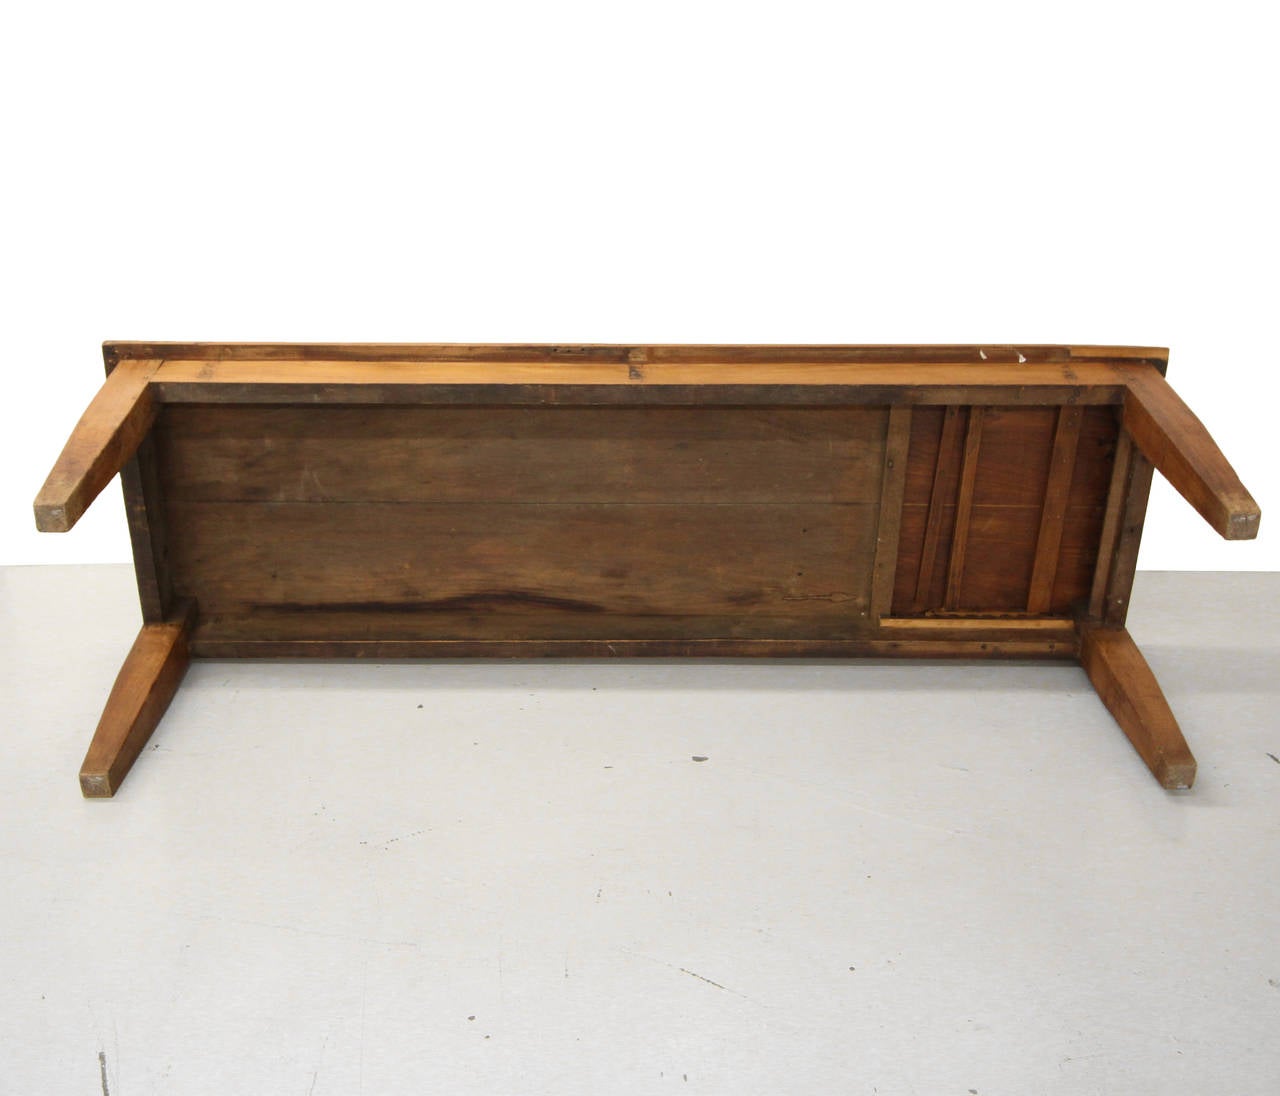 19th Century Primitive Antique Industrial Farmhouse Style Coffee Table